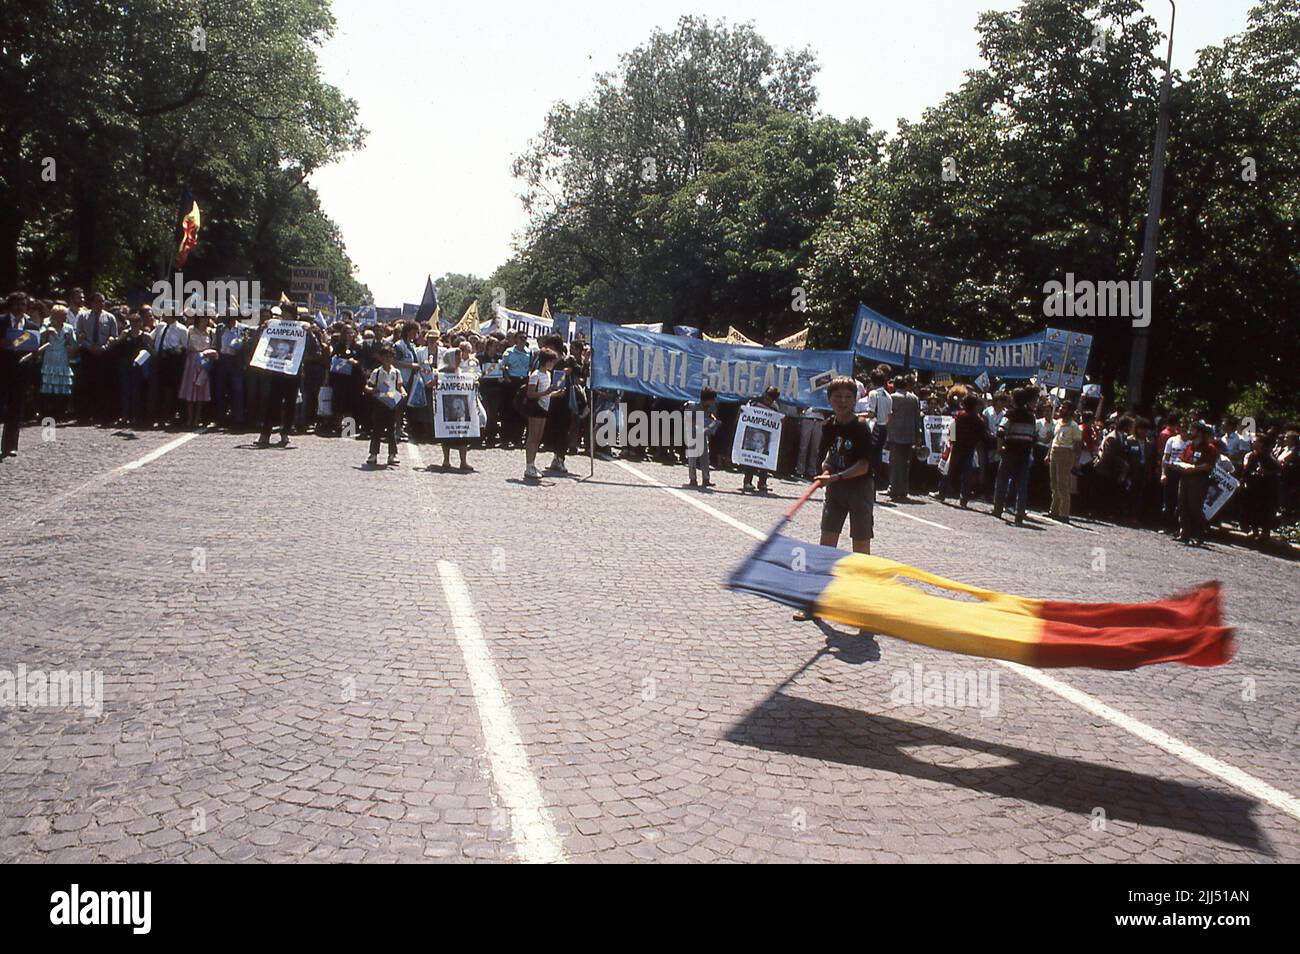 Bucharest, Romania, May 1990. Political rally organized by the National Liberal Party (PNL) days before the first democratic elections organized after the fall of communism. Person waving the Romanian flag with the Socialist emblem cut off, an anti-communist symbol during the Romanian Revolution of 1989. Stock Photo